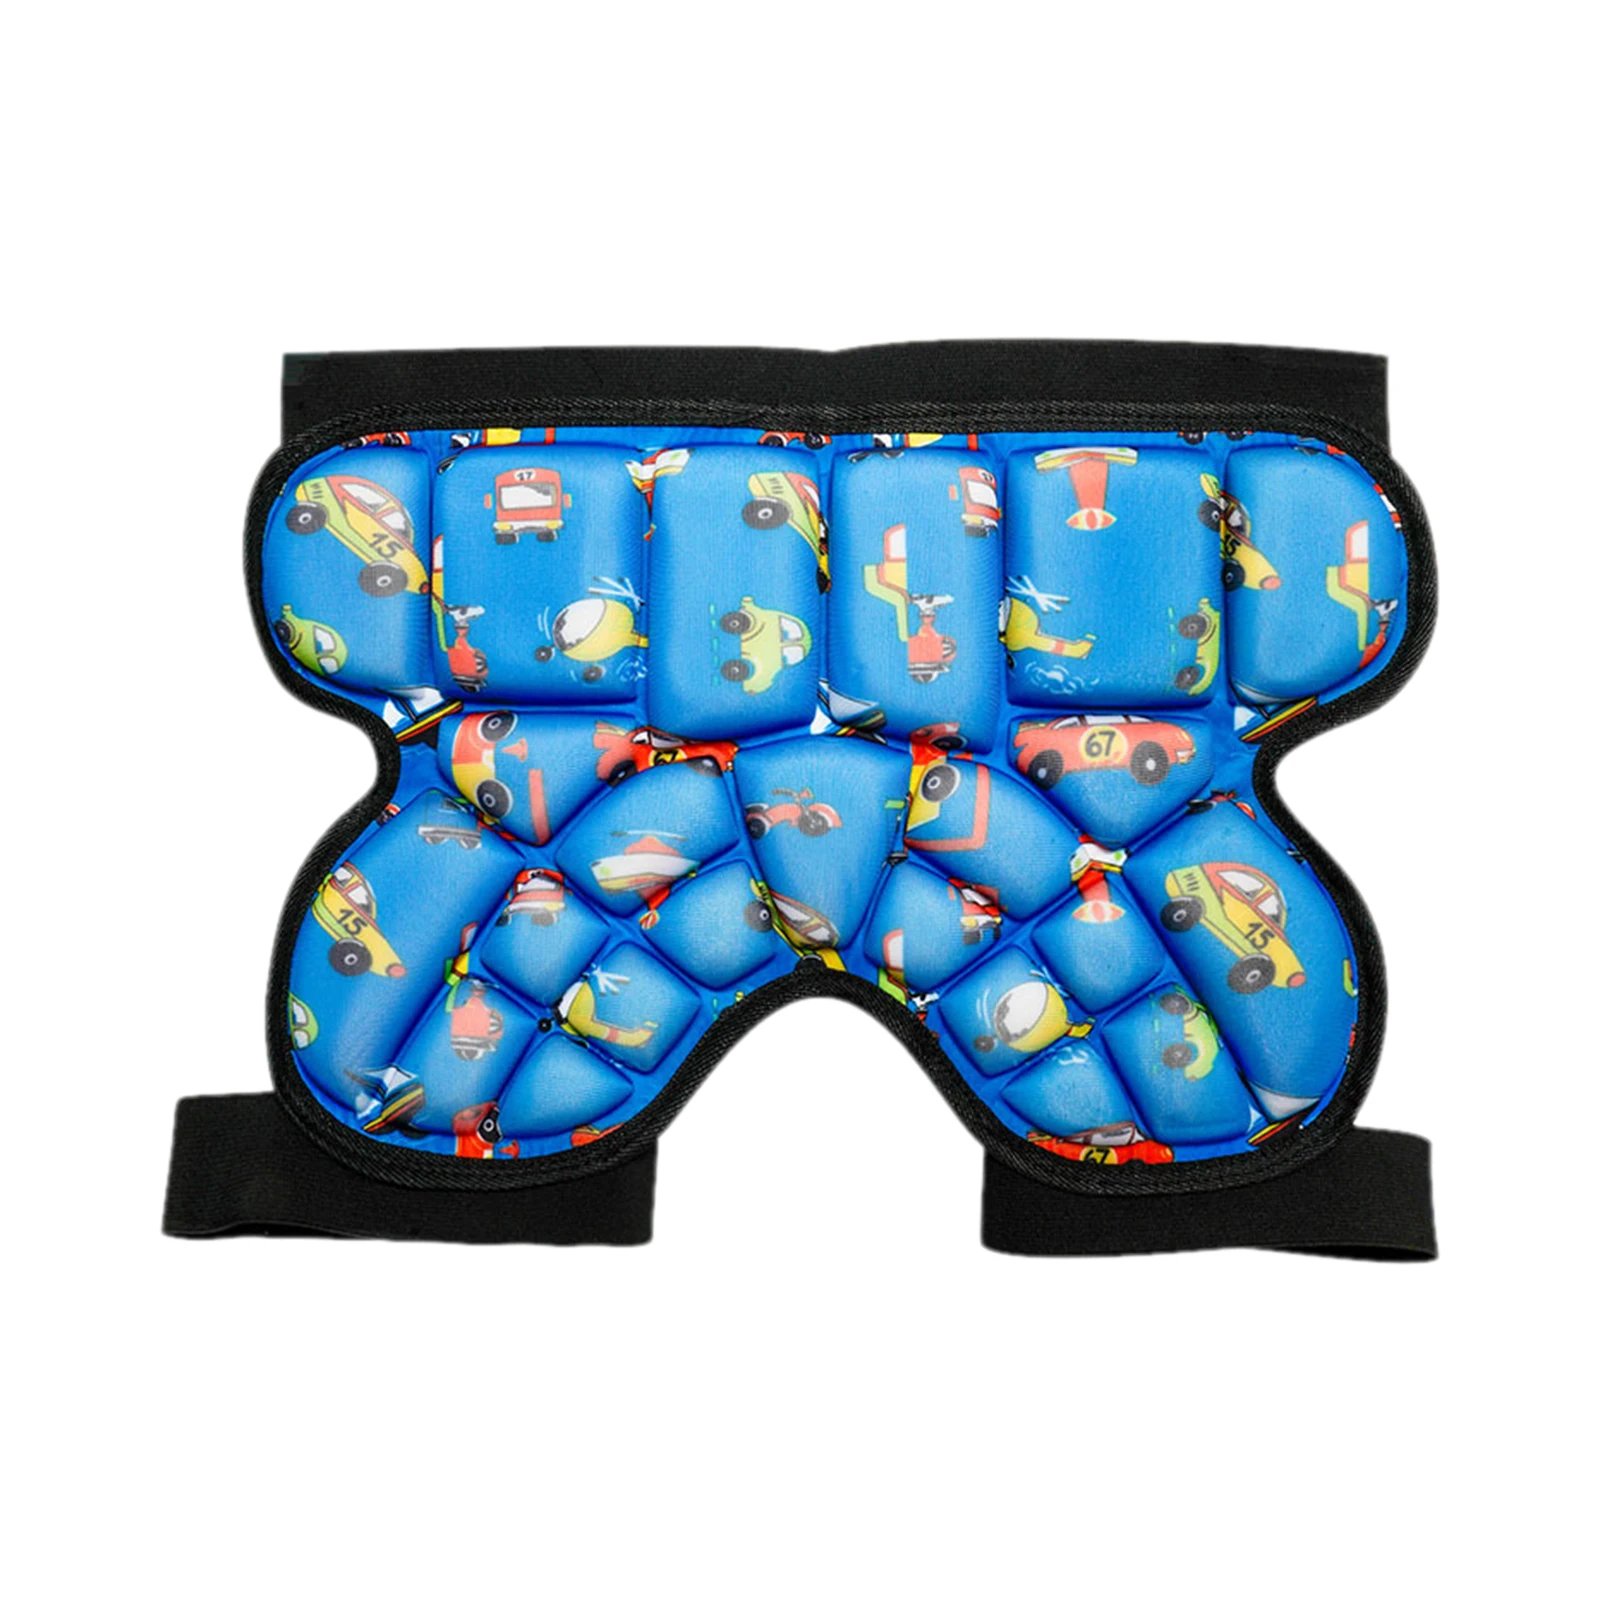 Soft 3D Padded Hip Protective Short Padded Protection Hip Pant Children Butt Pad Guard for ice skating Hockey Soccer Thick